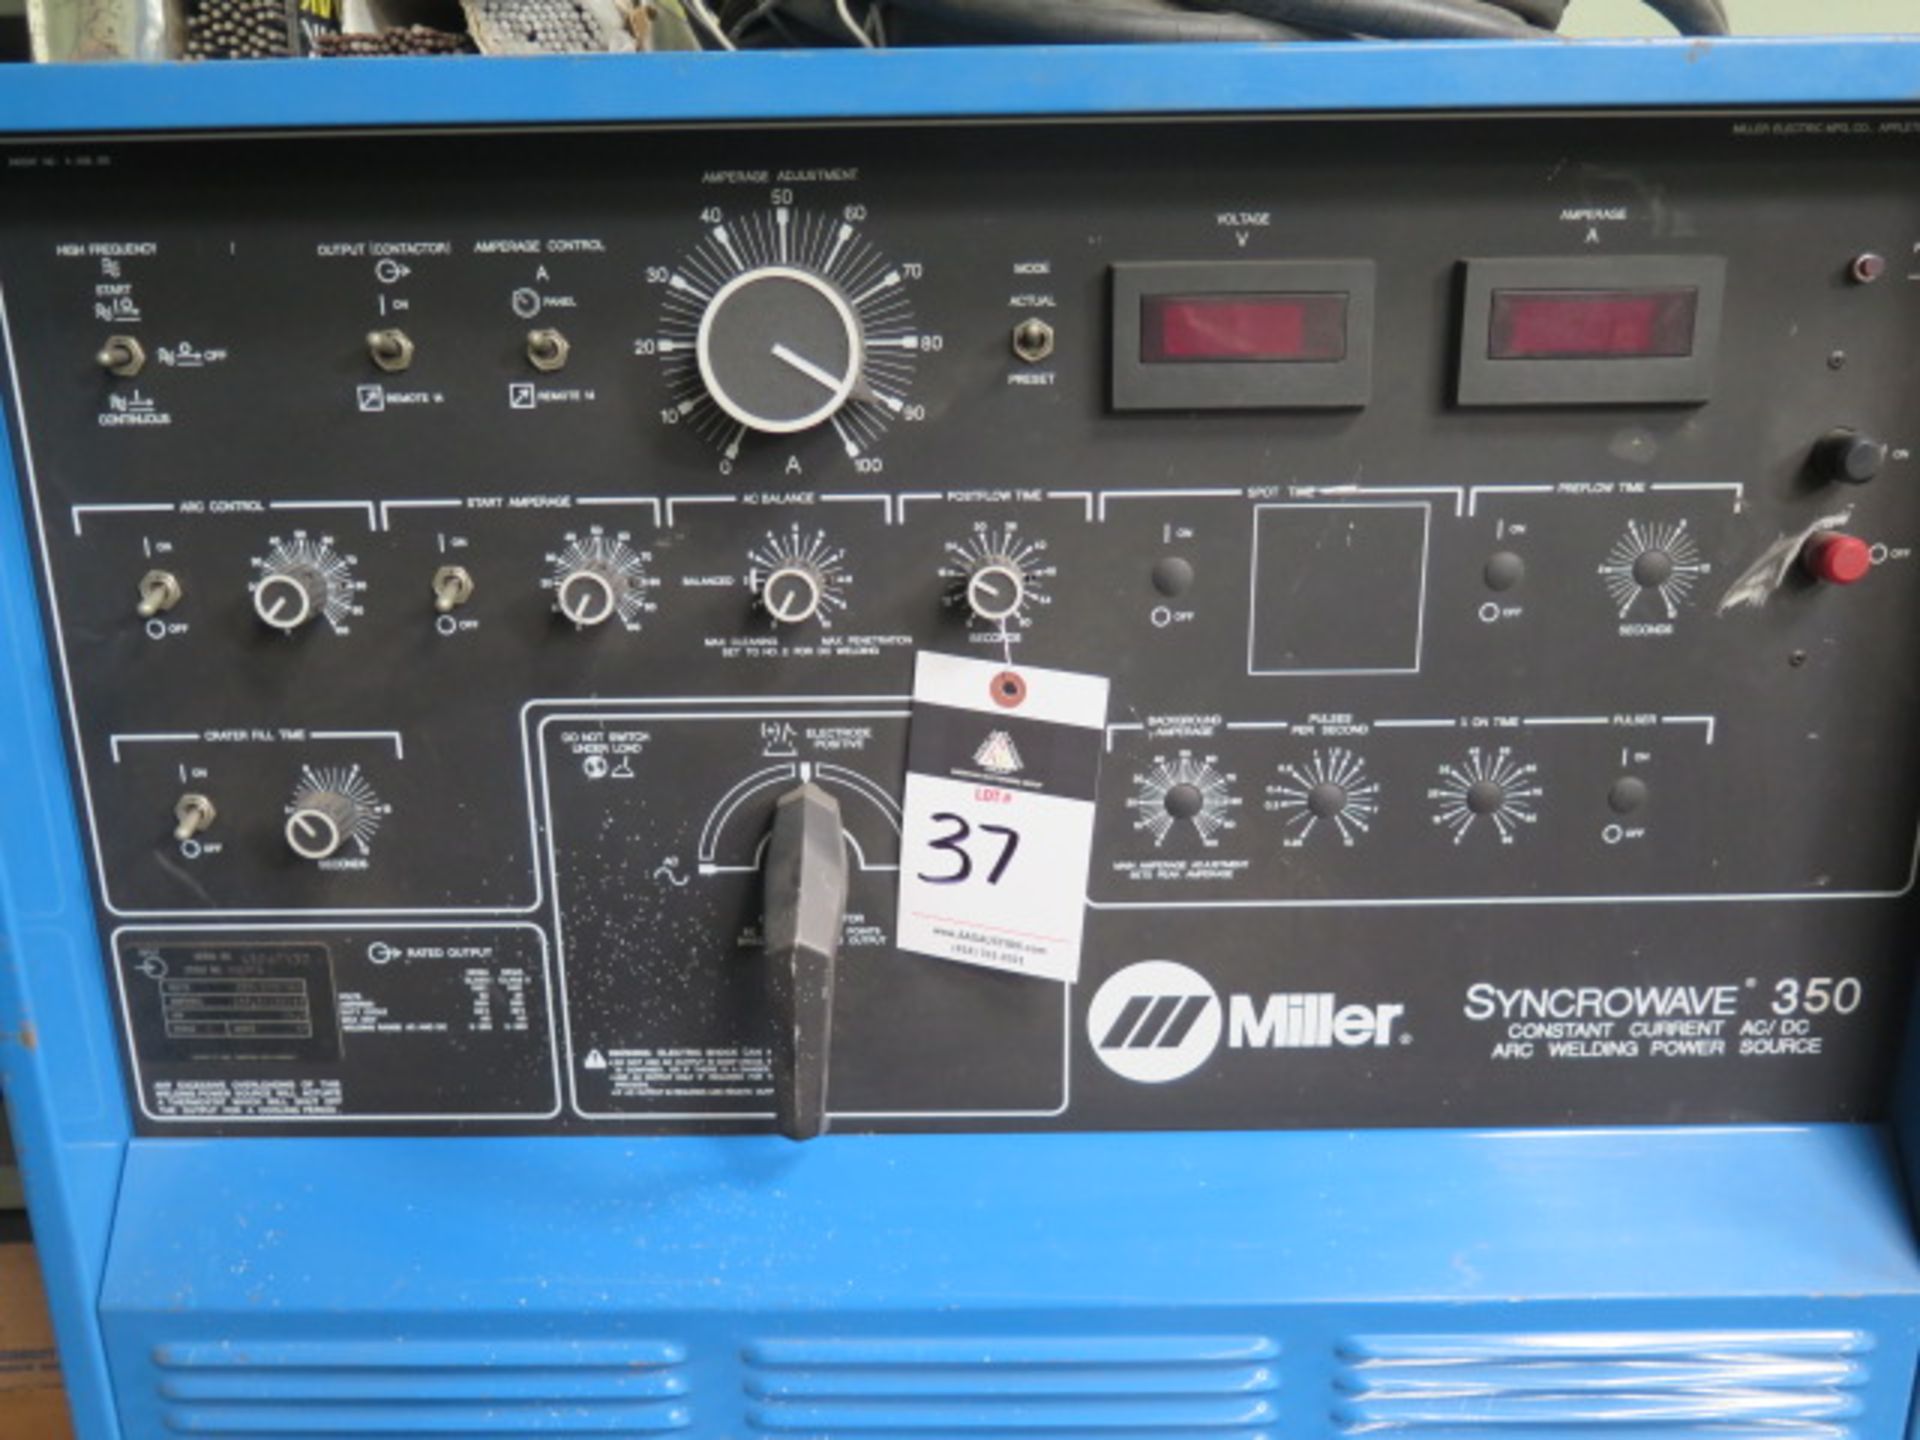 Miller Syncrowave 350 CC-AC/DC Arc Welding Power Source s/n KB067130 w/ Miller Coolmate 1A Cooling - Image 3 of 7